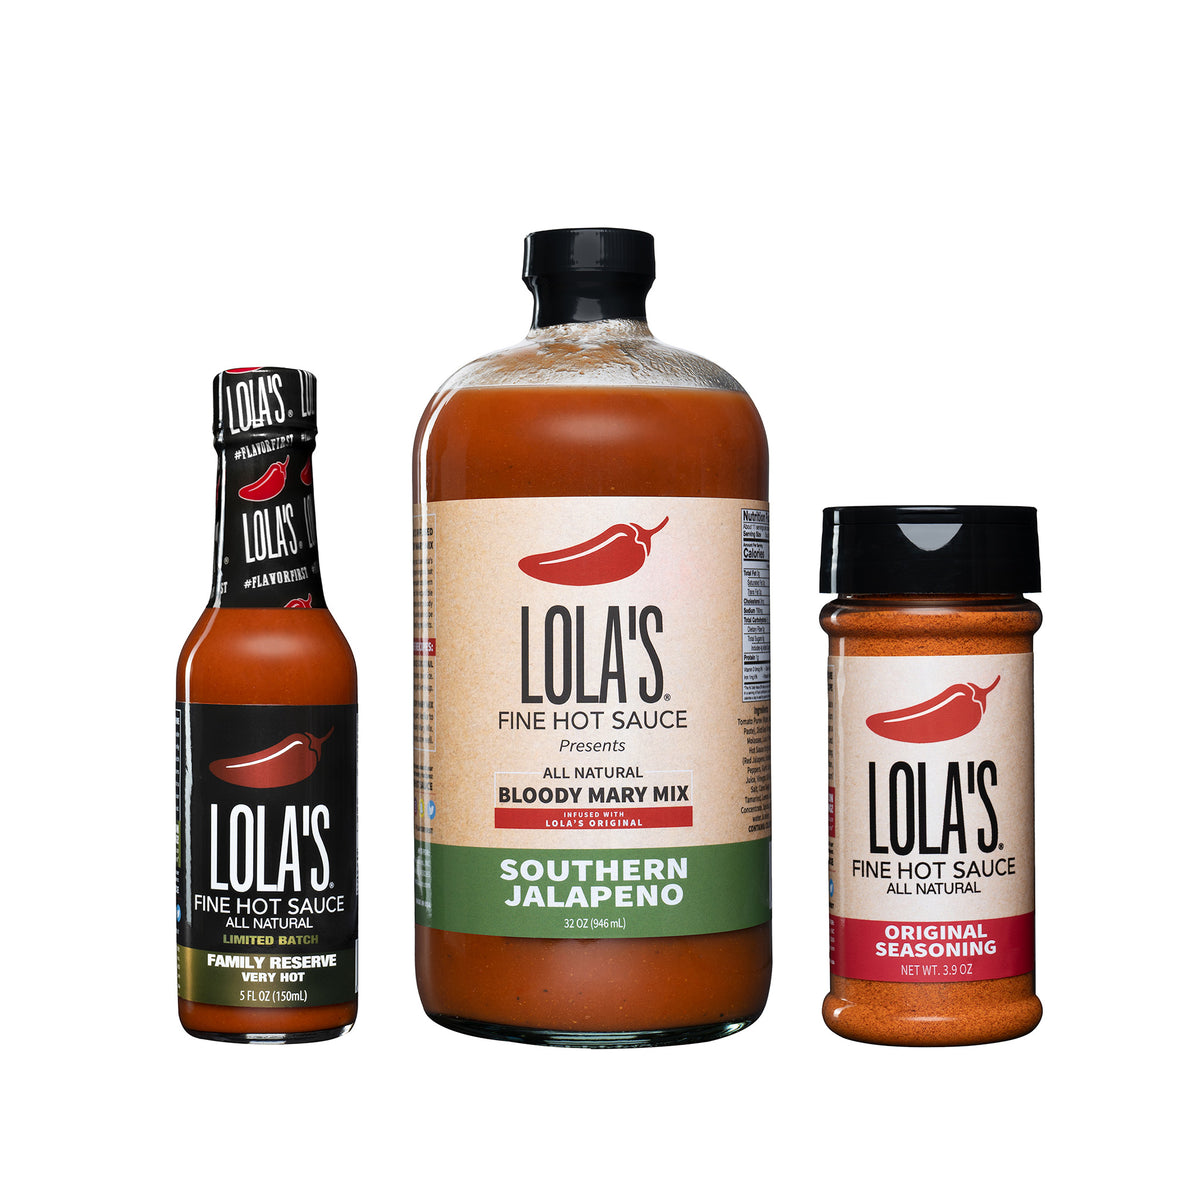 Lola's "Game Day" Bundle: A group of hot sauce bottles, a bottle of hot sauce, and a close-up of a bottle.